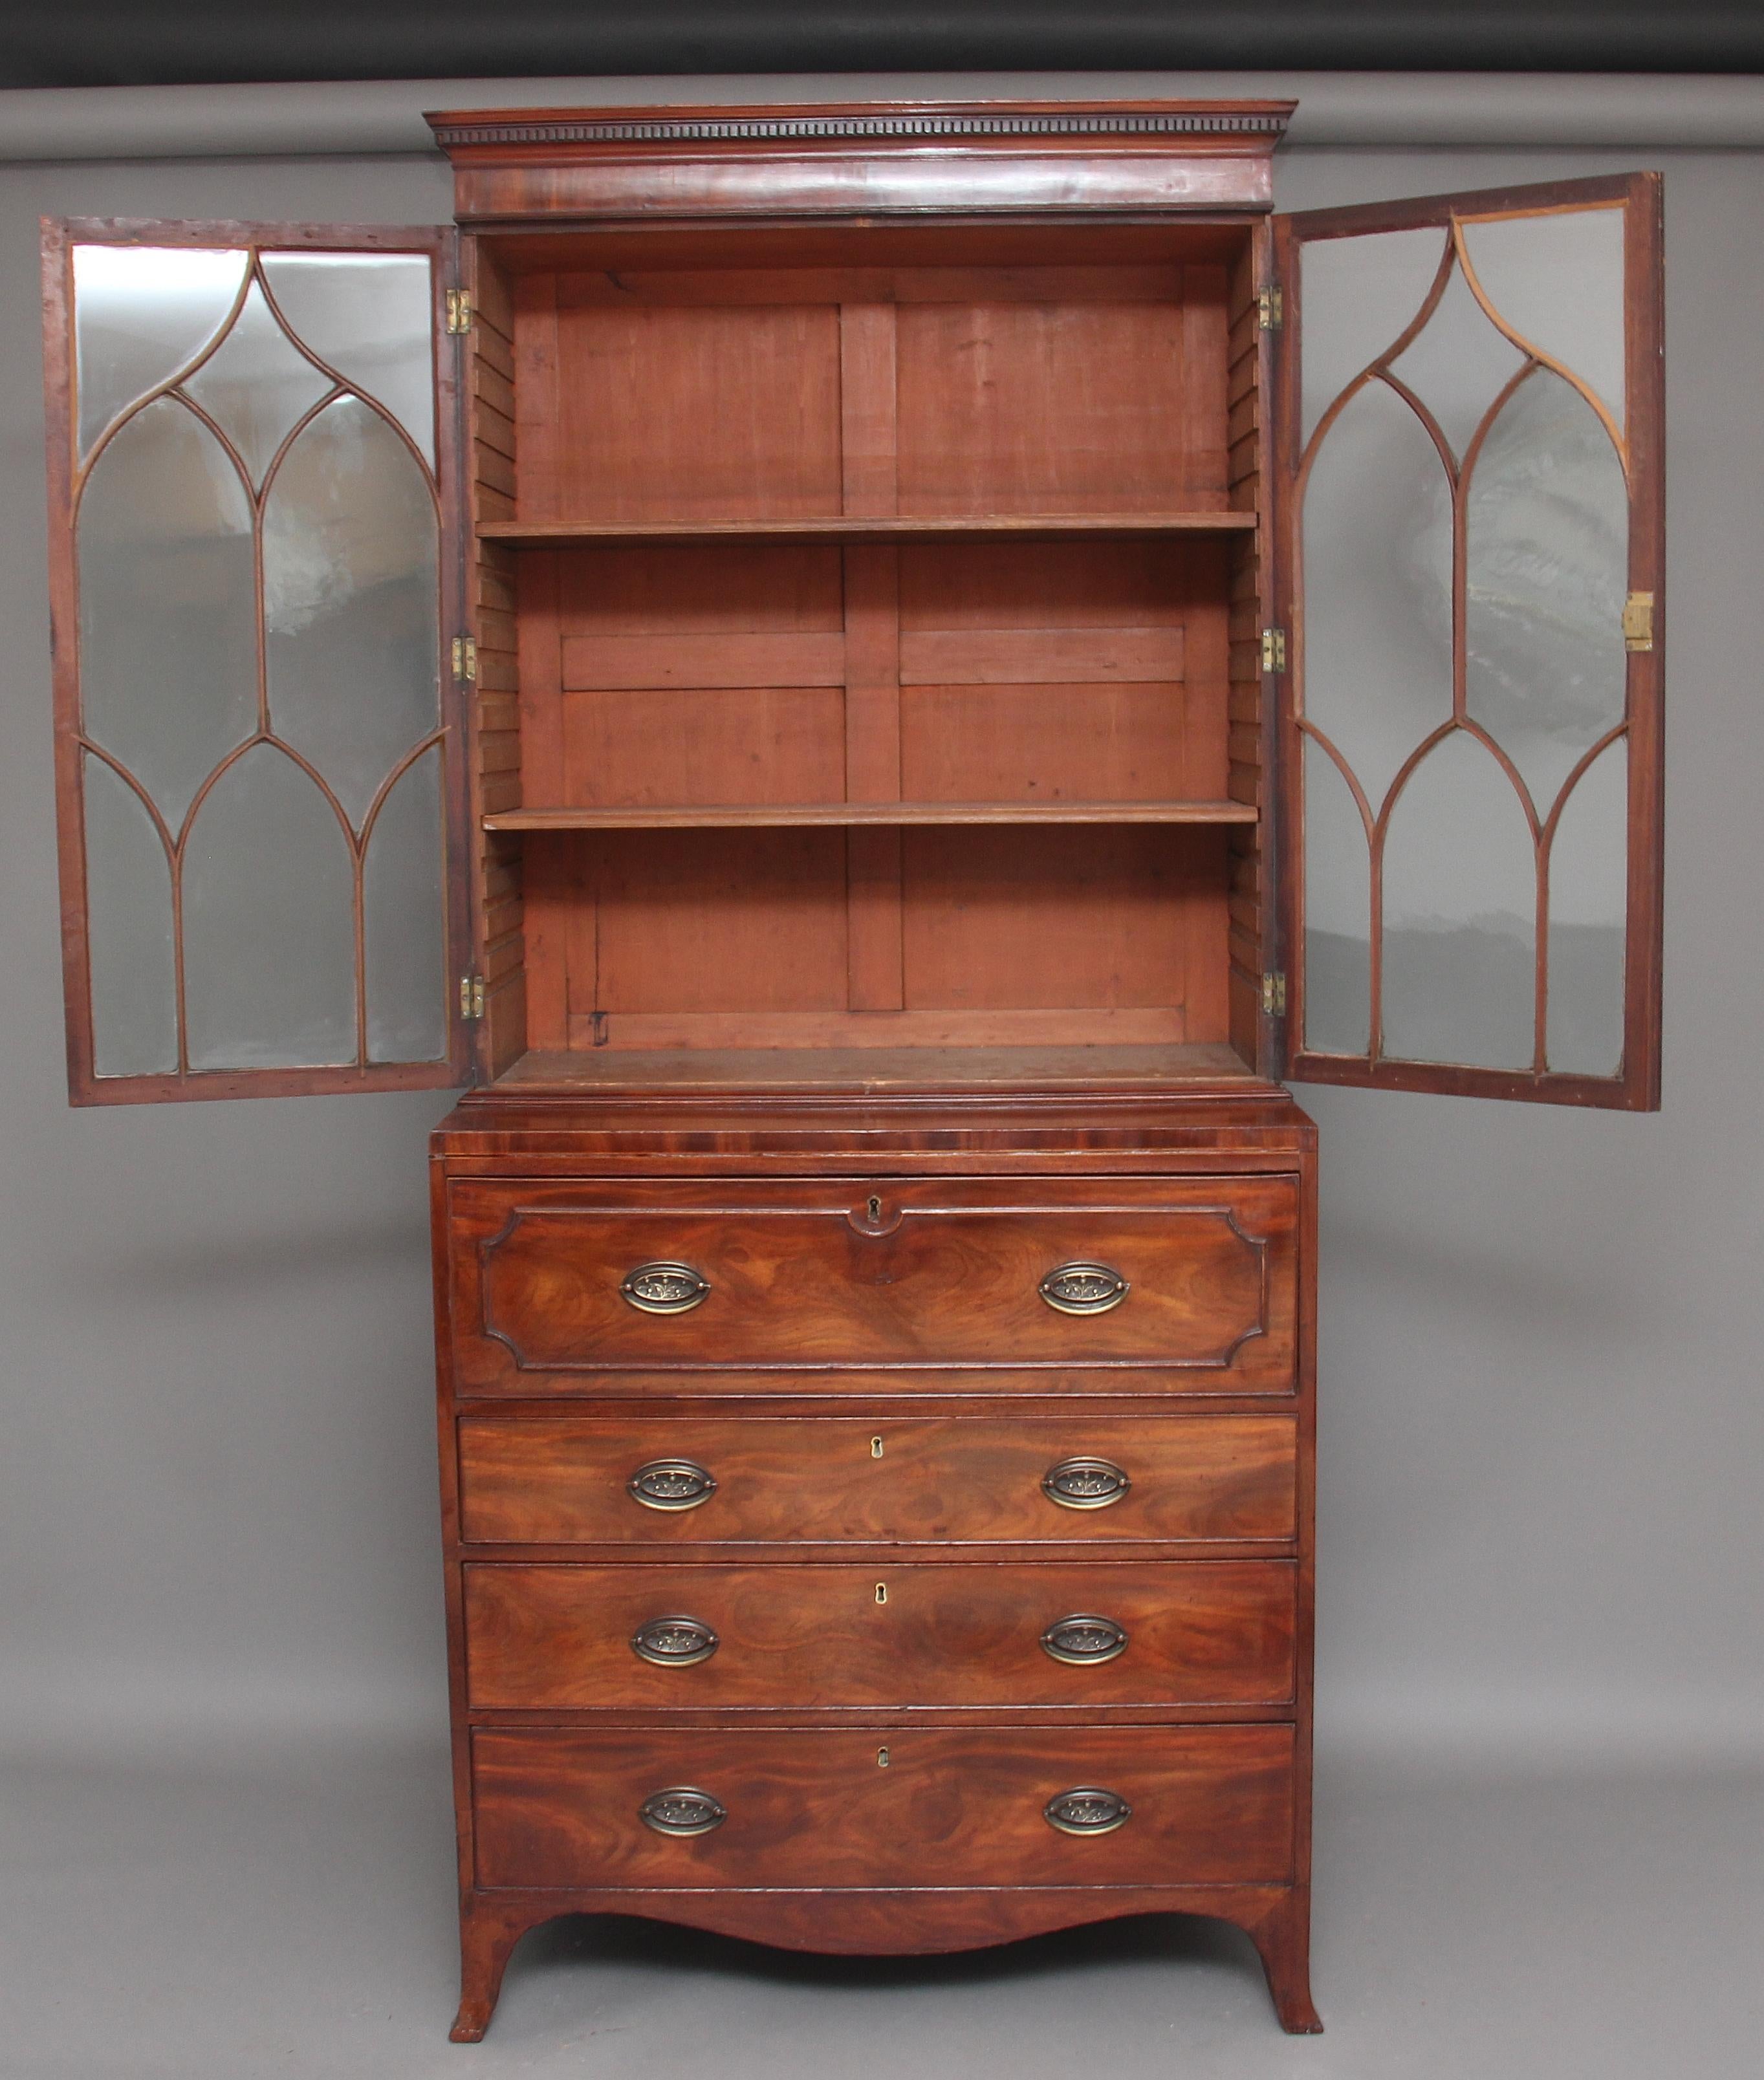 Early 19th century mahogany secretaire bookcase with a nice moulded cornice with dentil moulding, the bookcase having two astrigal glazed doors with two adjustable shelves inside, the bottom section having a pull out secretaire drawer opening to